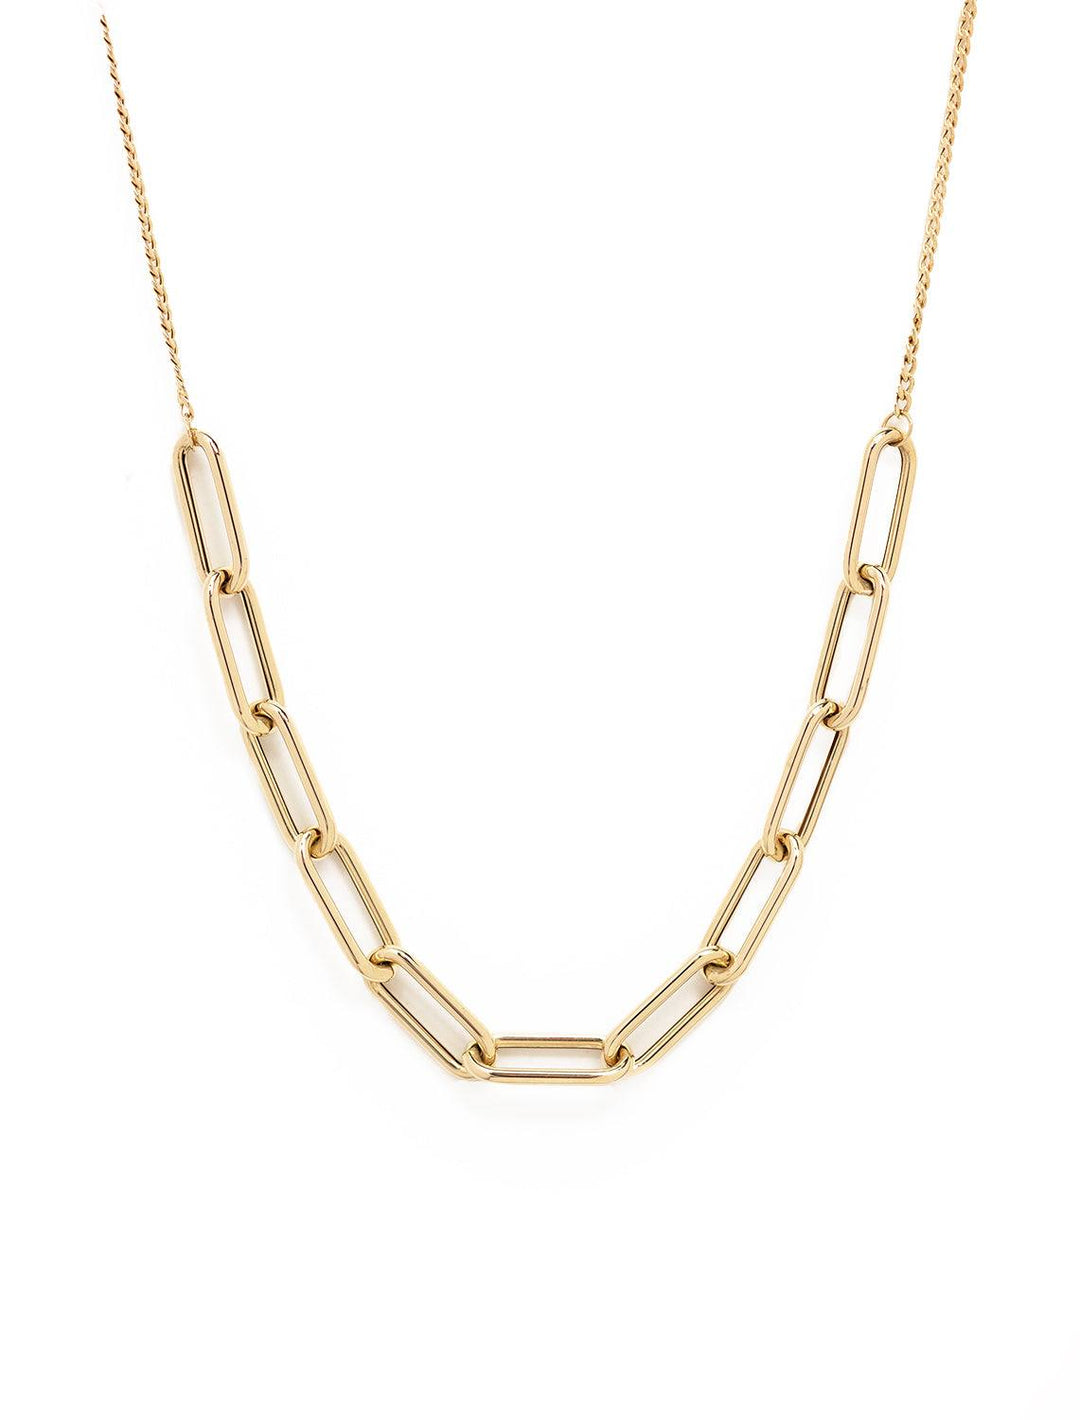 Front view of Zoe Chicco's 14k large paperclip necklace with adjustable curb chain.